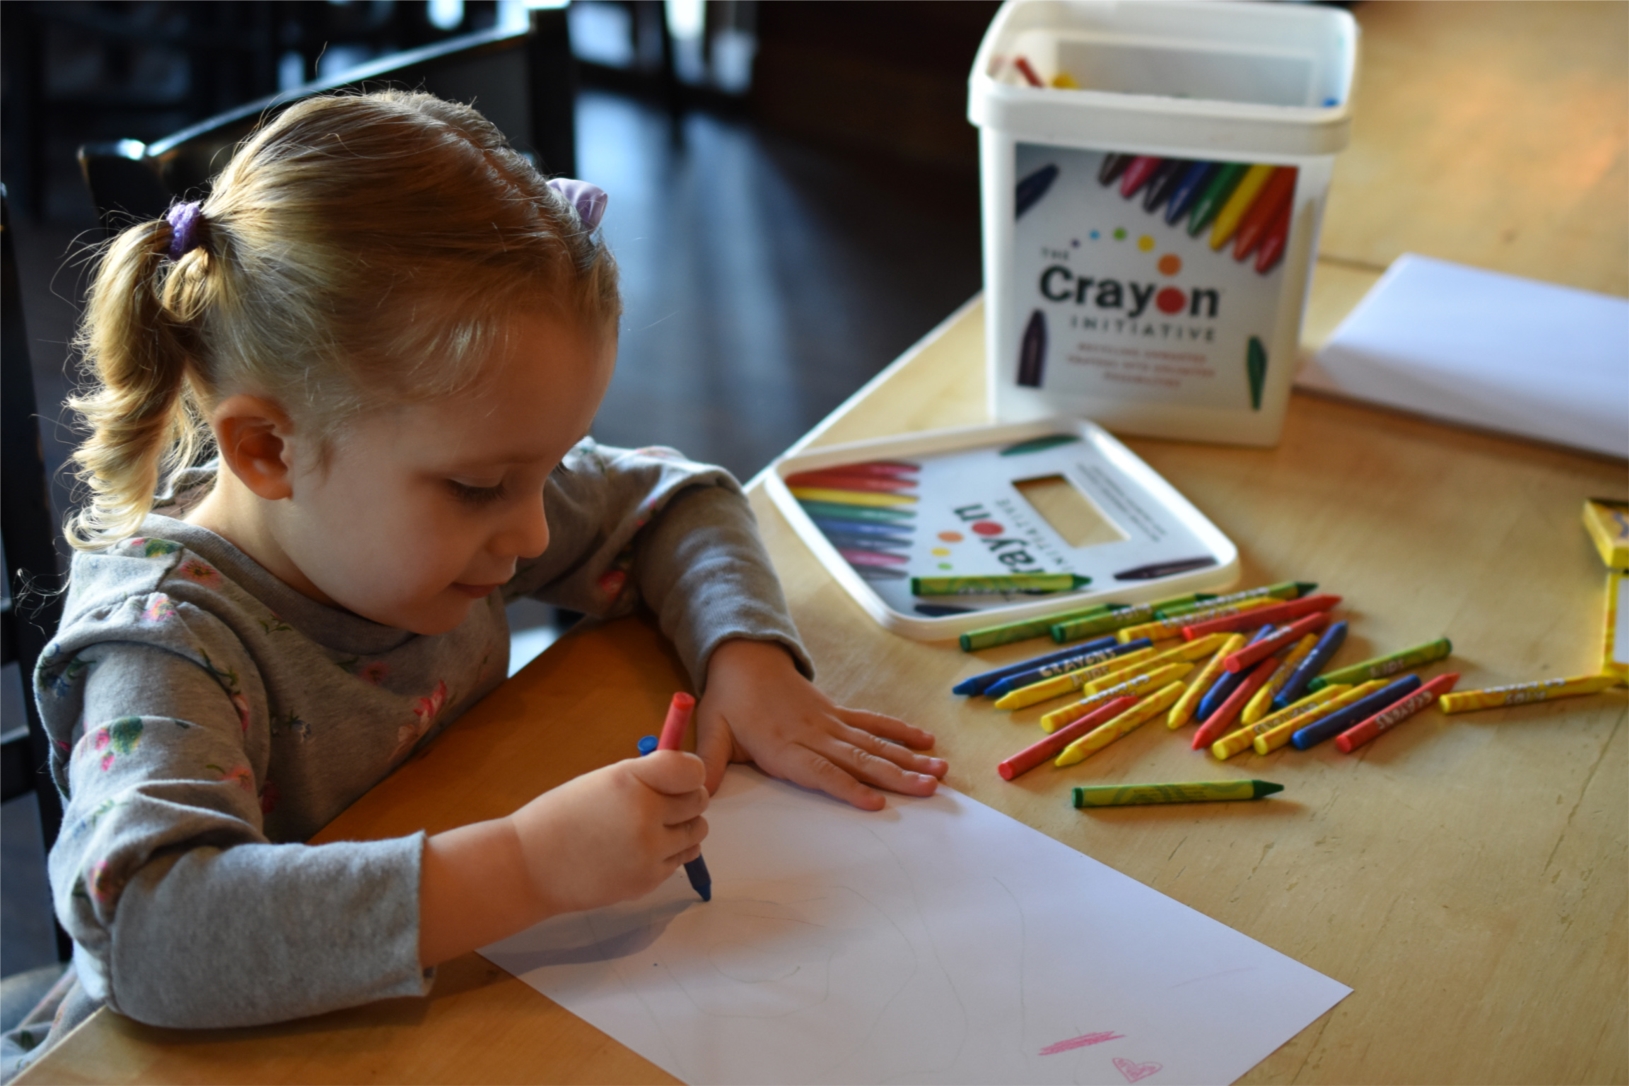 To further help our communities, we have partnered with the Crayon Initiative. This organization collects used crayons, recycles them, and then distributes the new crayons to children's hospitals across the country. 